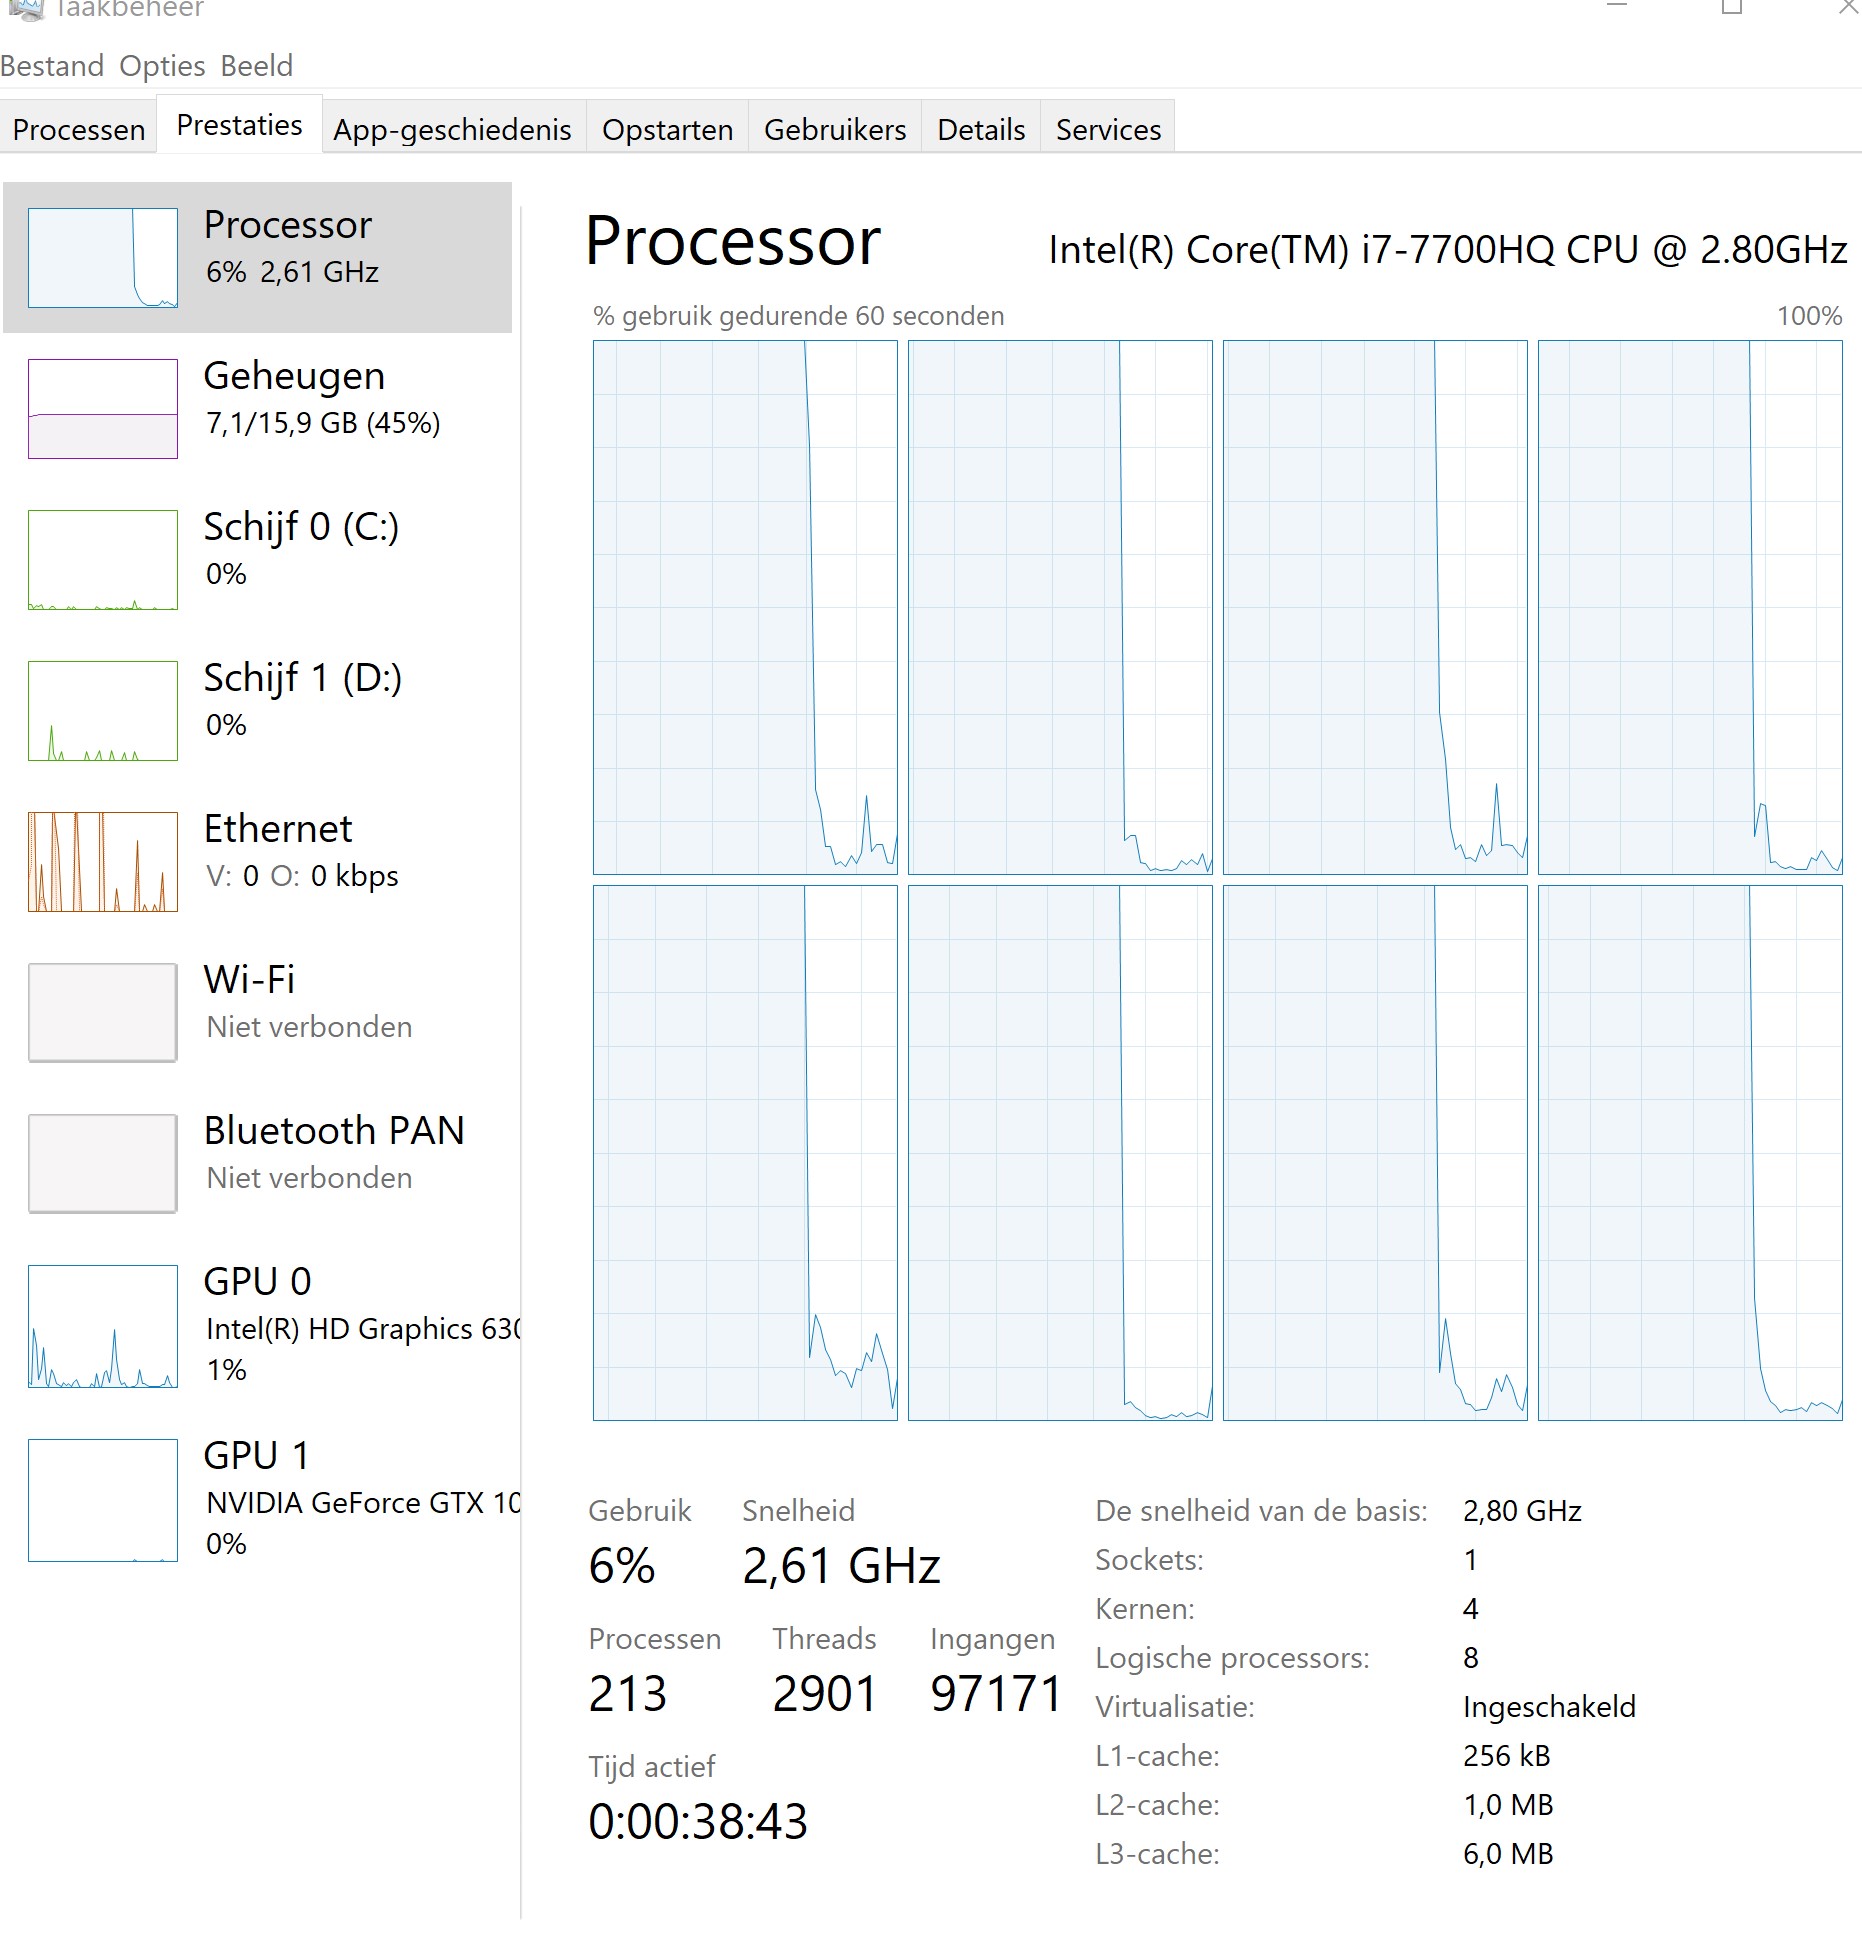 CPU 100% USAGE but when i maximise the task manager it reduces 4a53f042-cf06-4f67-a16e-2cc48a3ee1da?upload=true.jpg